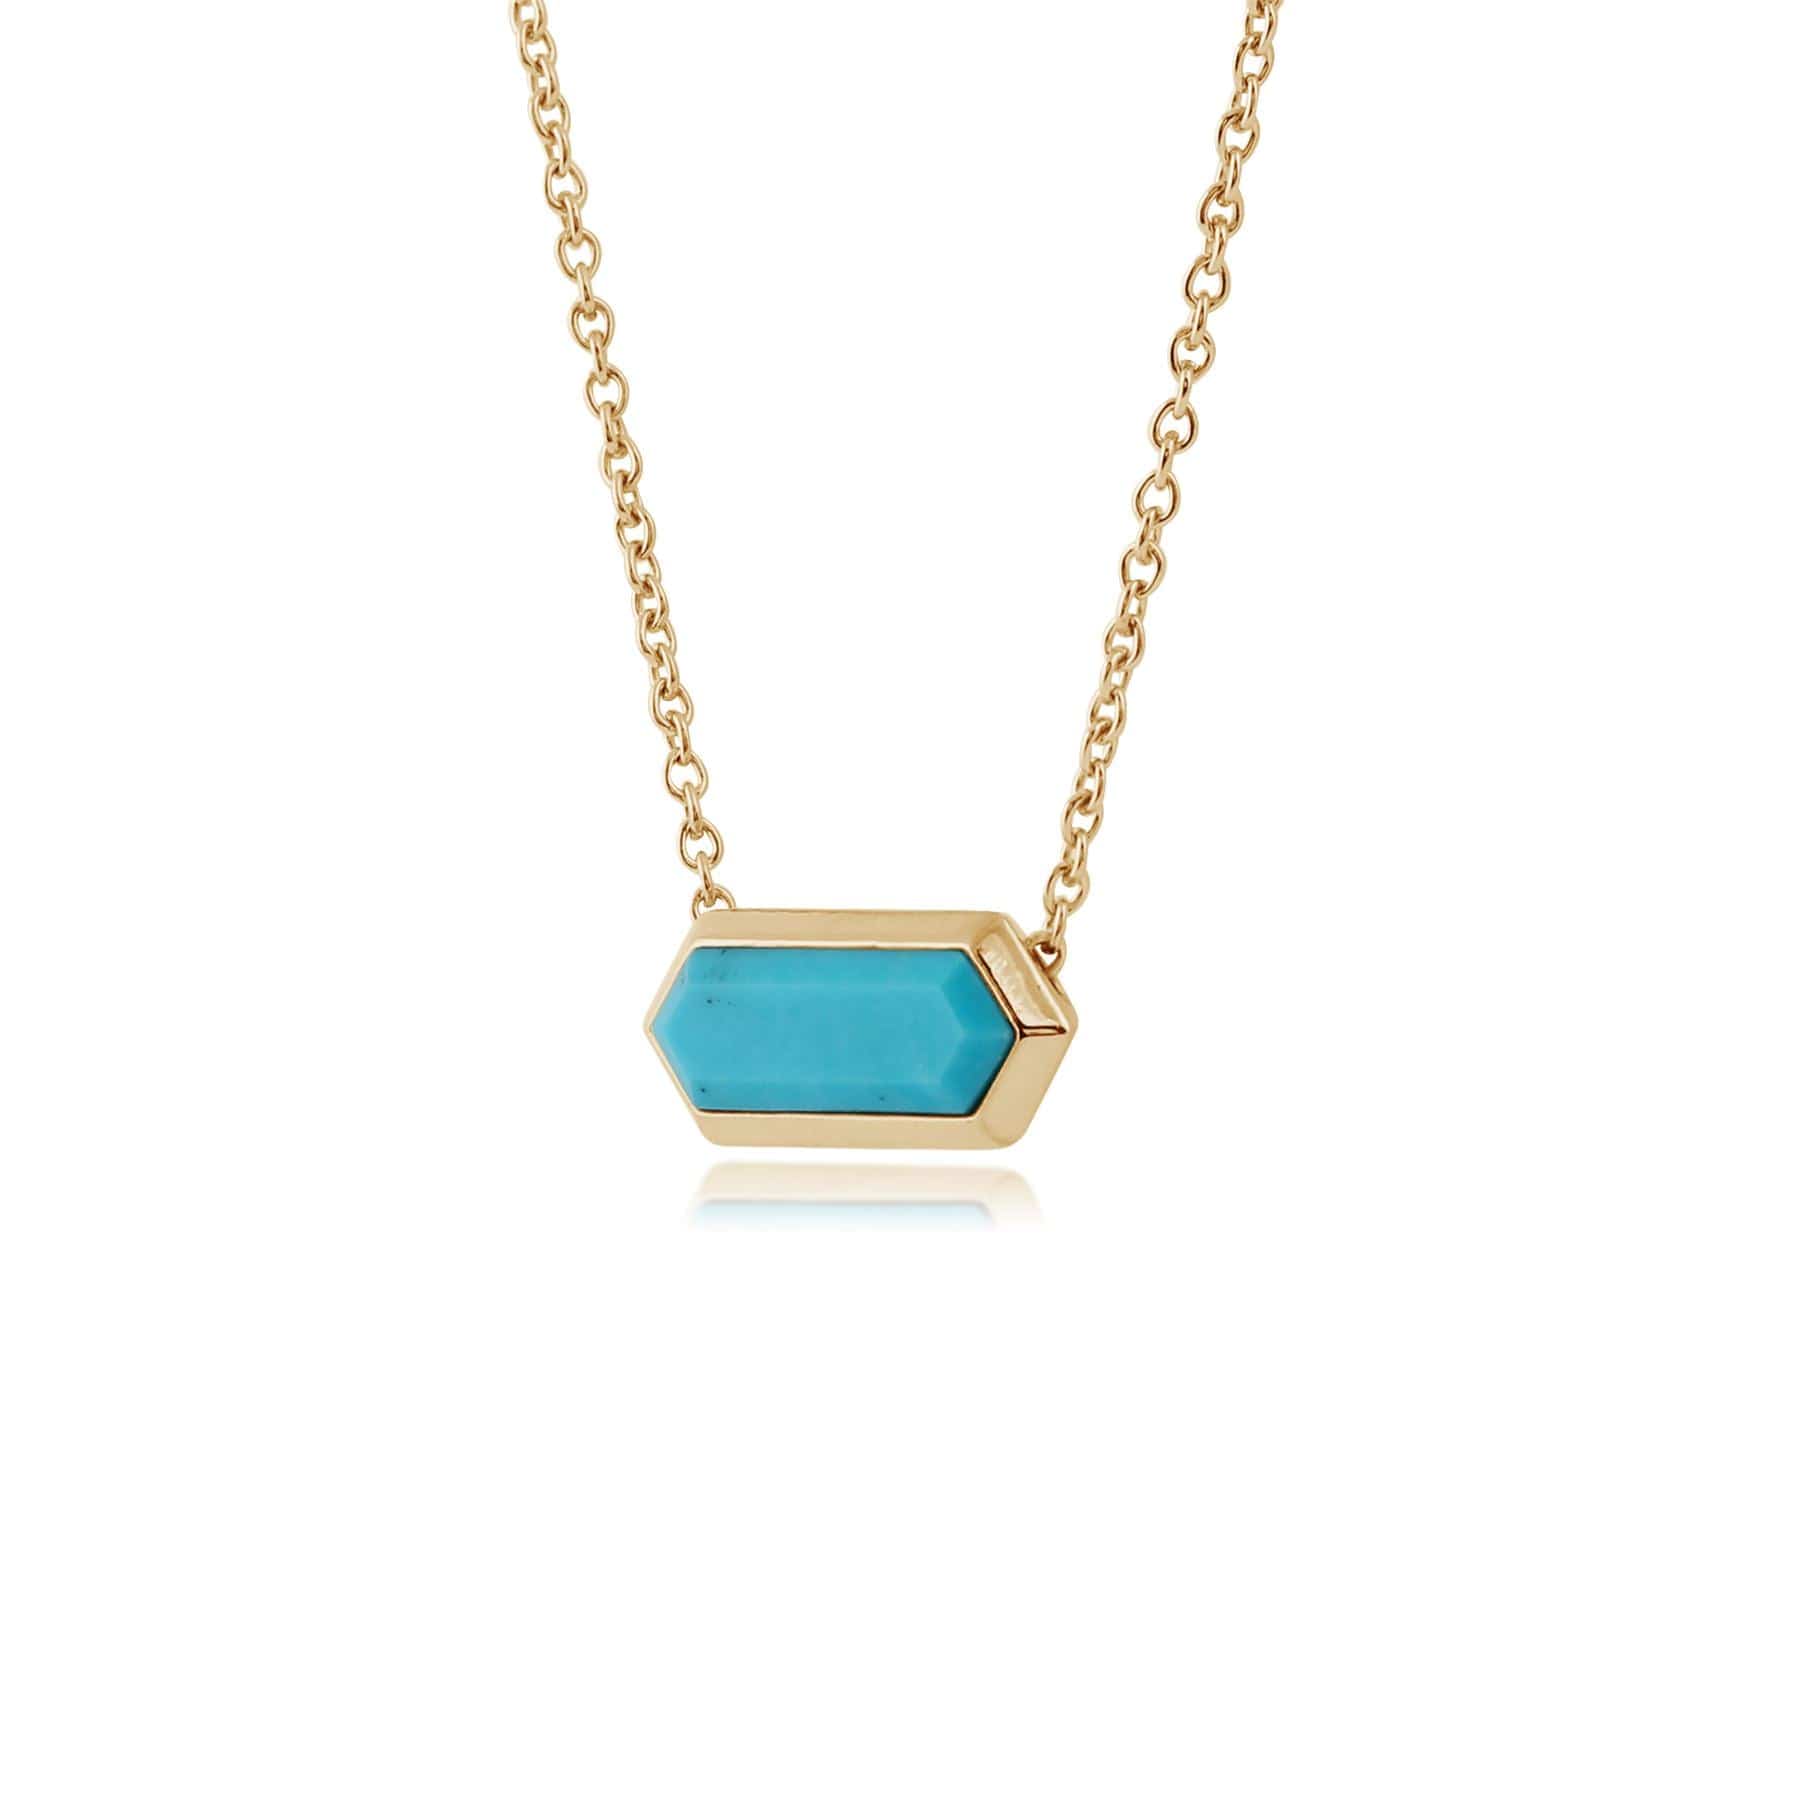 Geometric Hexagon Turquoise Prism Bar Necklace in Gold Plated  Silver